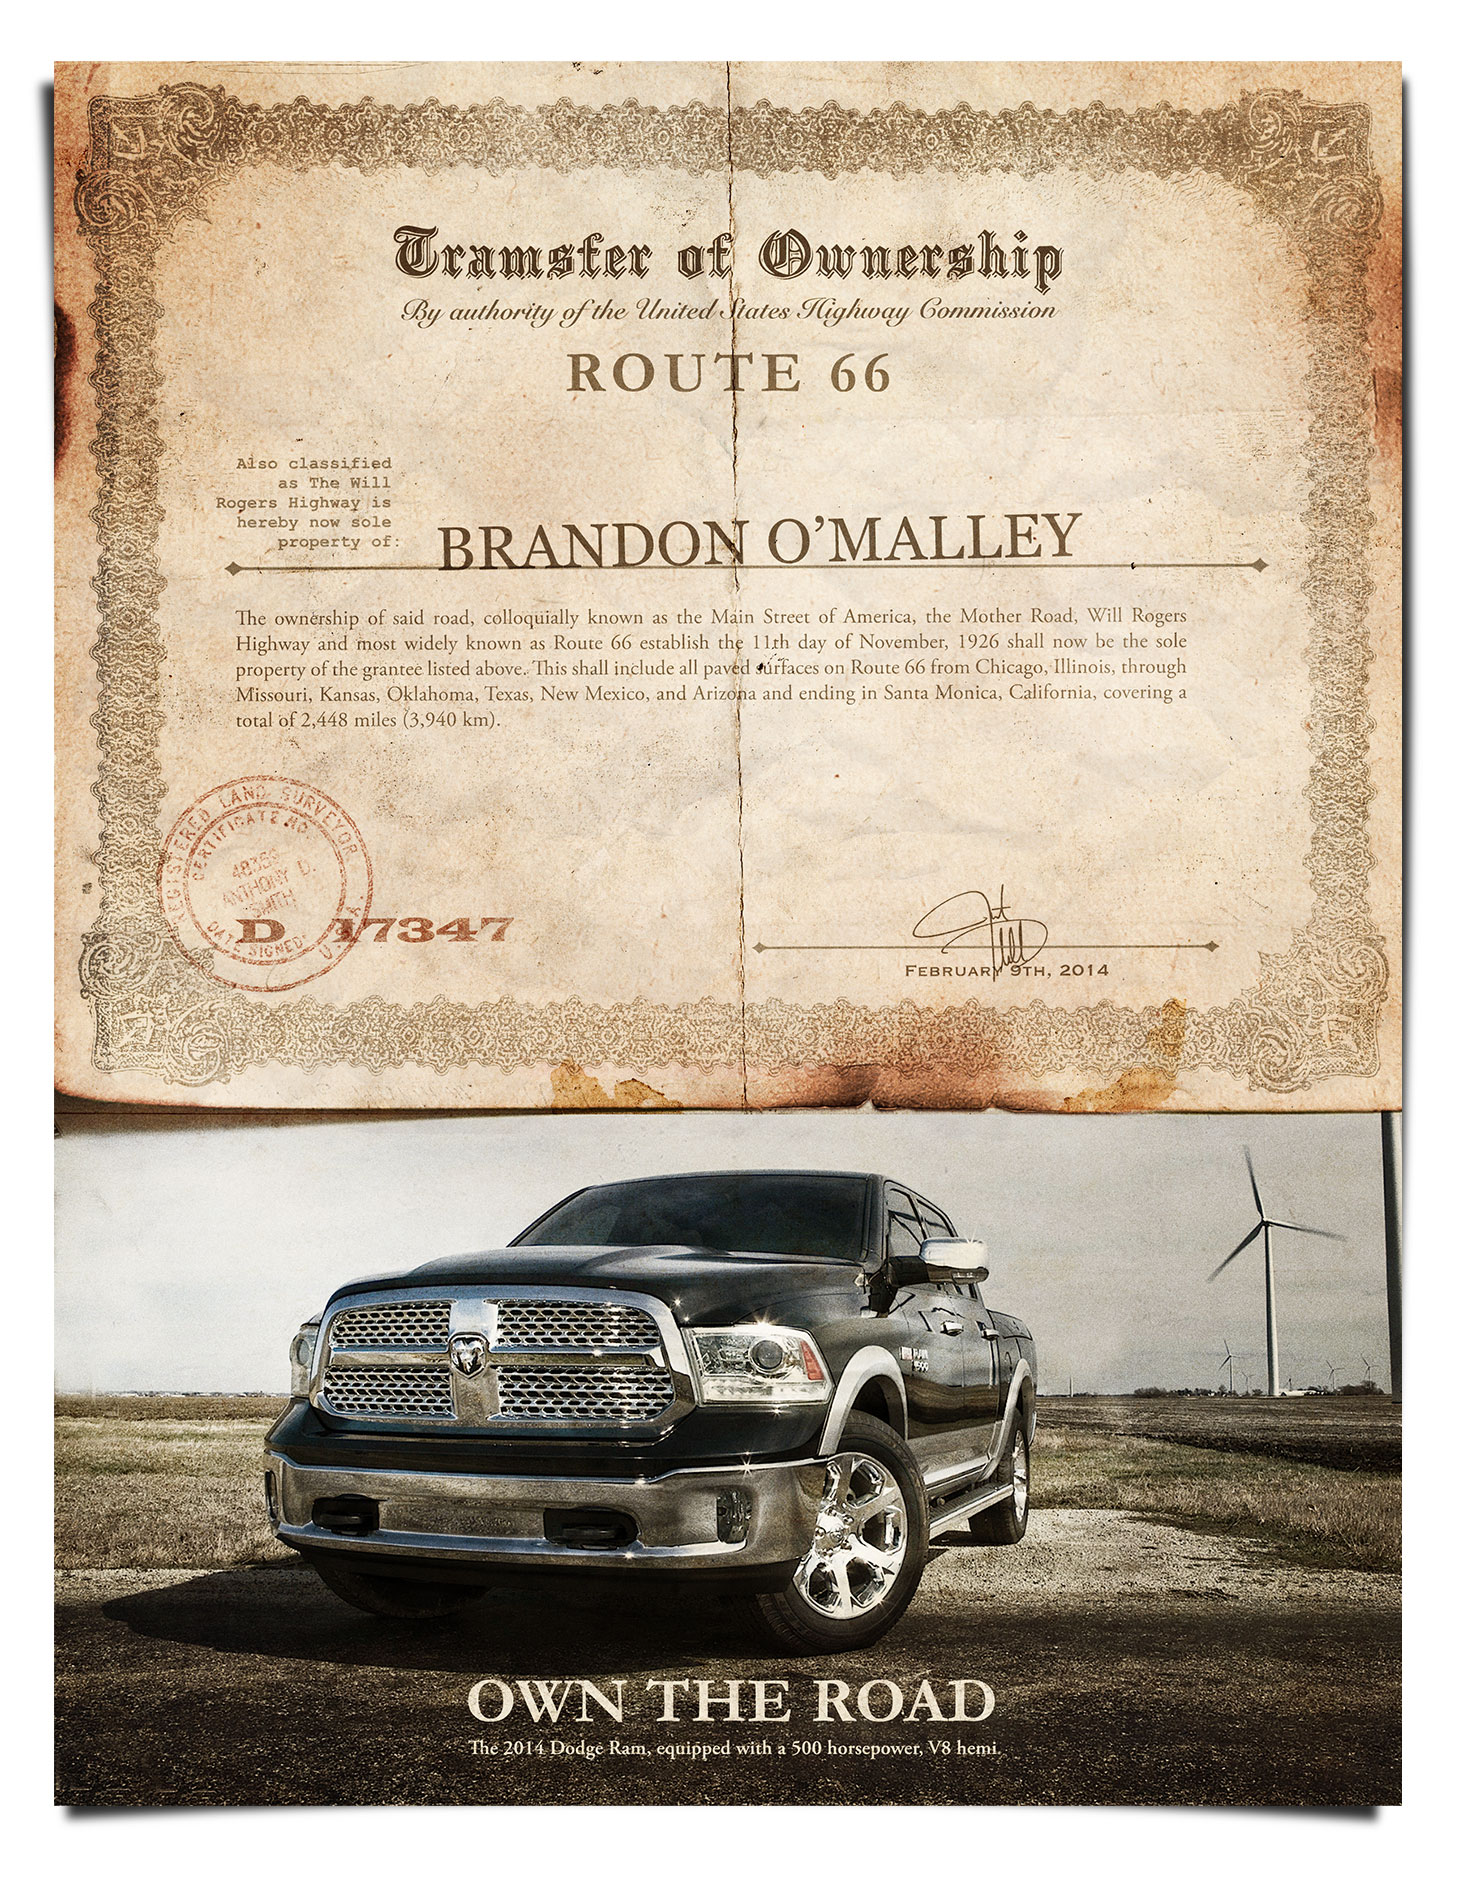 Dodge ad featuring deed of land to Brandon O'Malley over a photo of new dodge truck